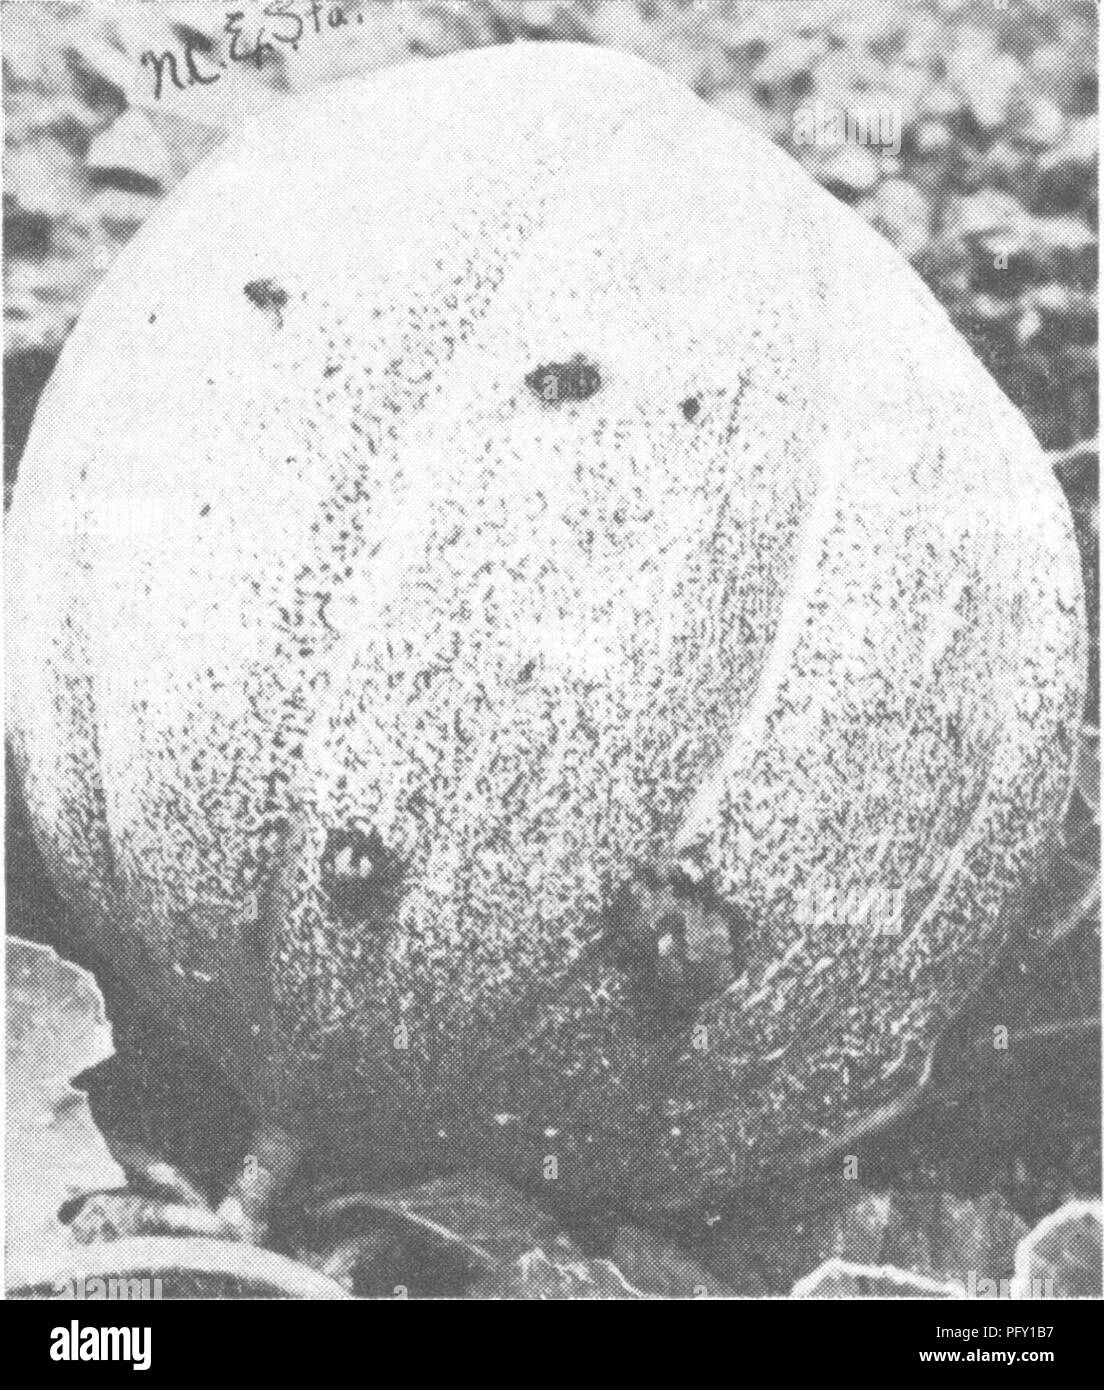 . The encyclopedia of practical horticulture; a reference system of commercial horticulture, covering the practical and scientific phases of horticulture, with special reference to fruits and vegetables;. Gardening; Fruit-culture; Vegetable gardening. 860 ENCYCLOPEDIA OF PRACTICAL HORTICULTURE. Fig. 2. Pickle Worm Injury to Cantaloup. Cocoons The cocoon is a thin, scanty covering of white silken threads, spun by the worm in a fold of some leaf before transform- ing to the pupal stage. They are general- ly found in dead or dying leaves near the ground, or lying on the soil under the in- fested  Stock Photo